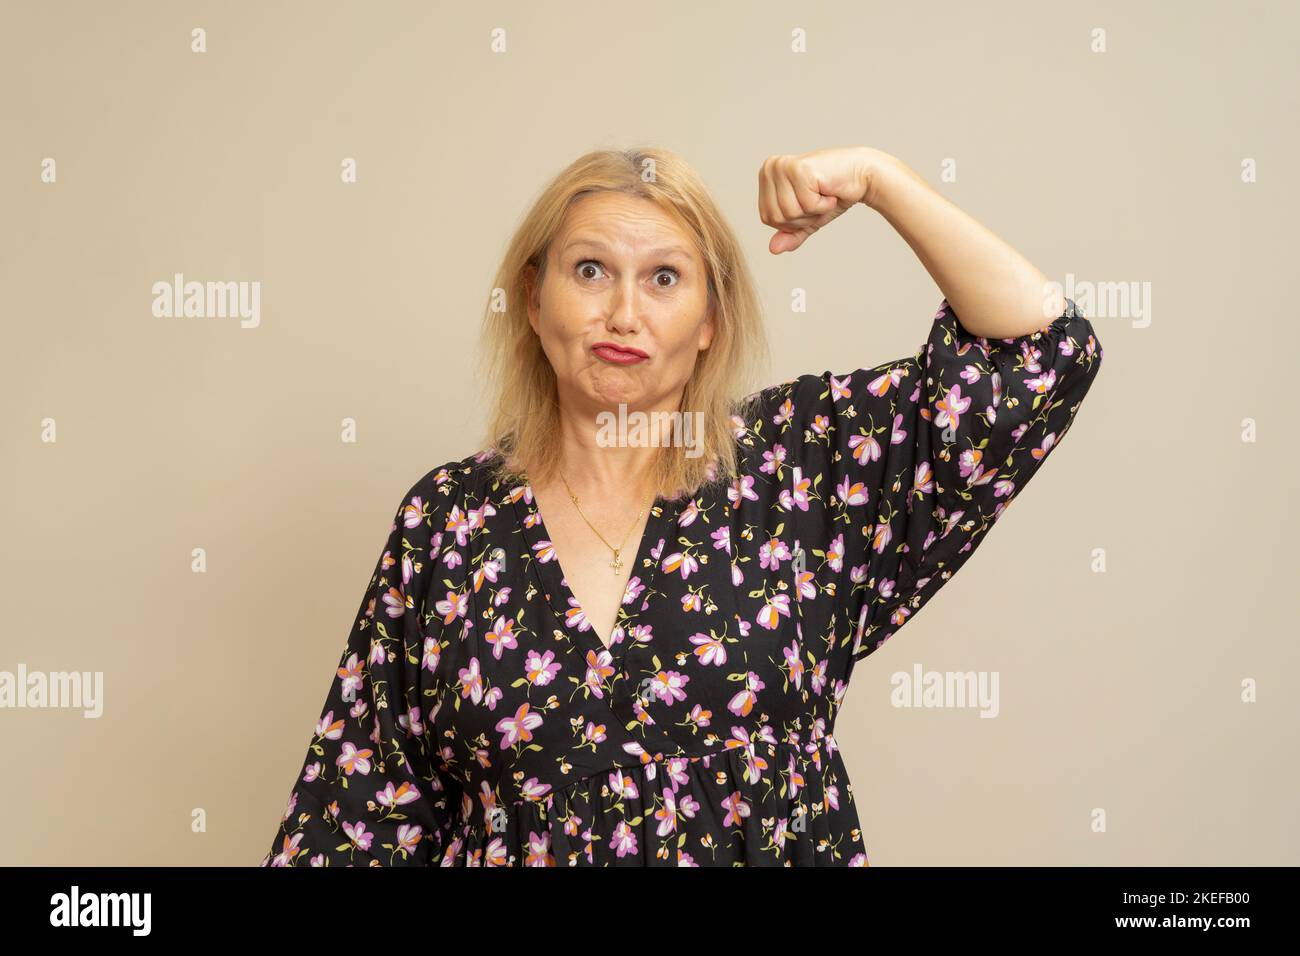 Sport, healthy lifestyle, fitness, good body condition, women's health. Close up portrait of a blonde woman smiling while showing off her arm and Stock Photo